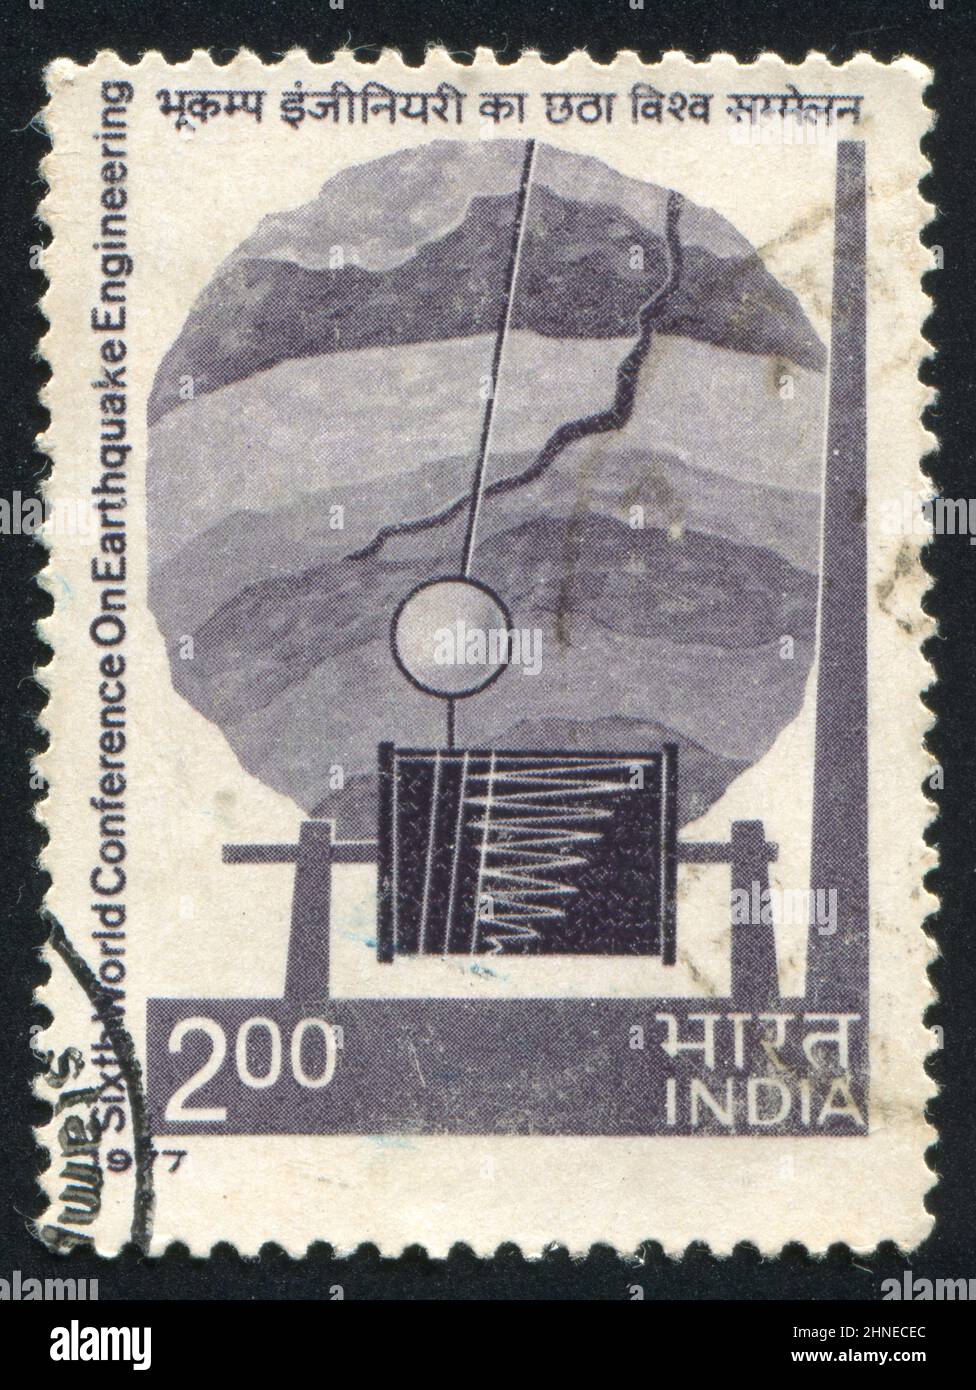 INDIA - CIRCA 1977: stamp printed by India, shows Earth’s Crust with Fault, Seismograph, circa 1977 Stock Photo